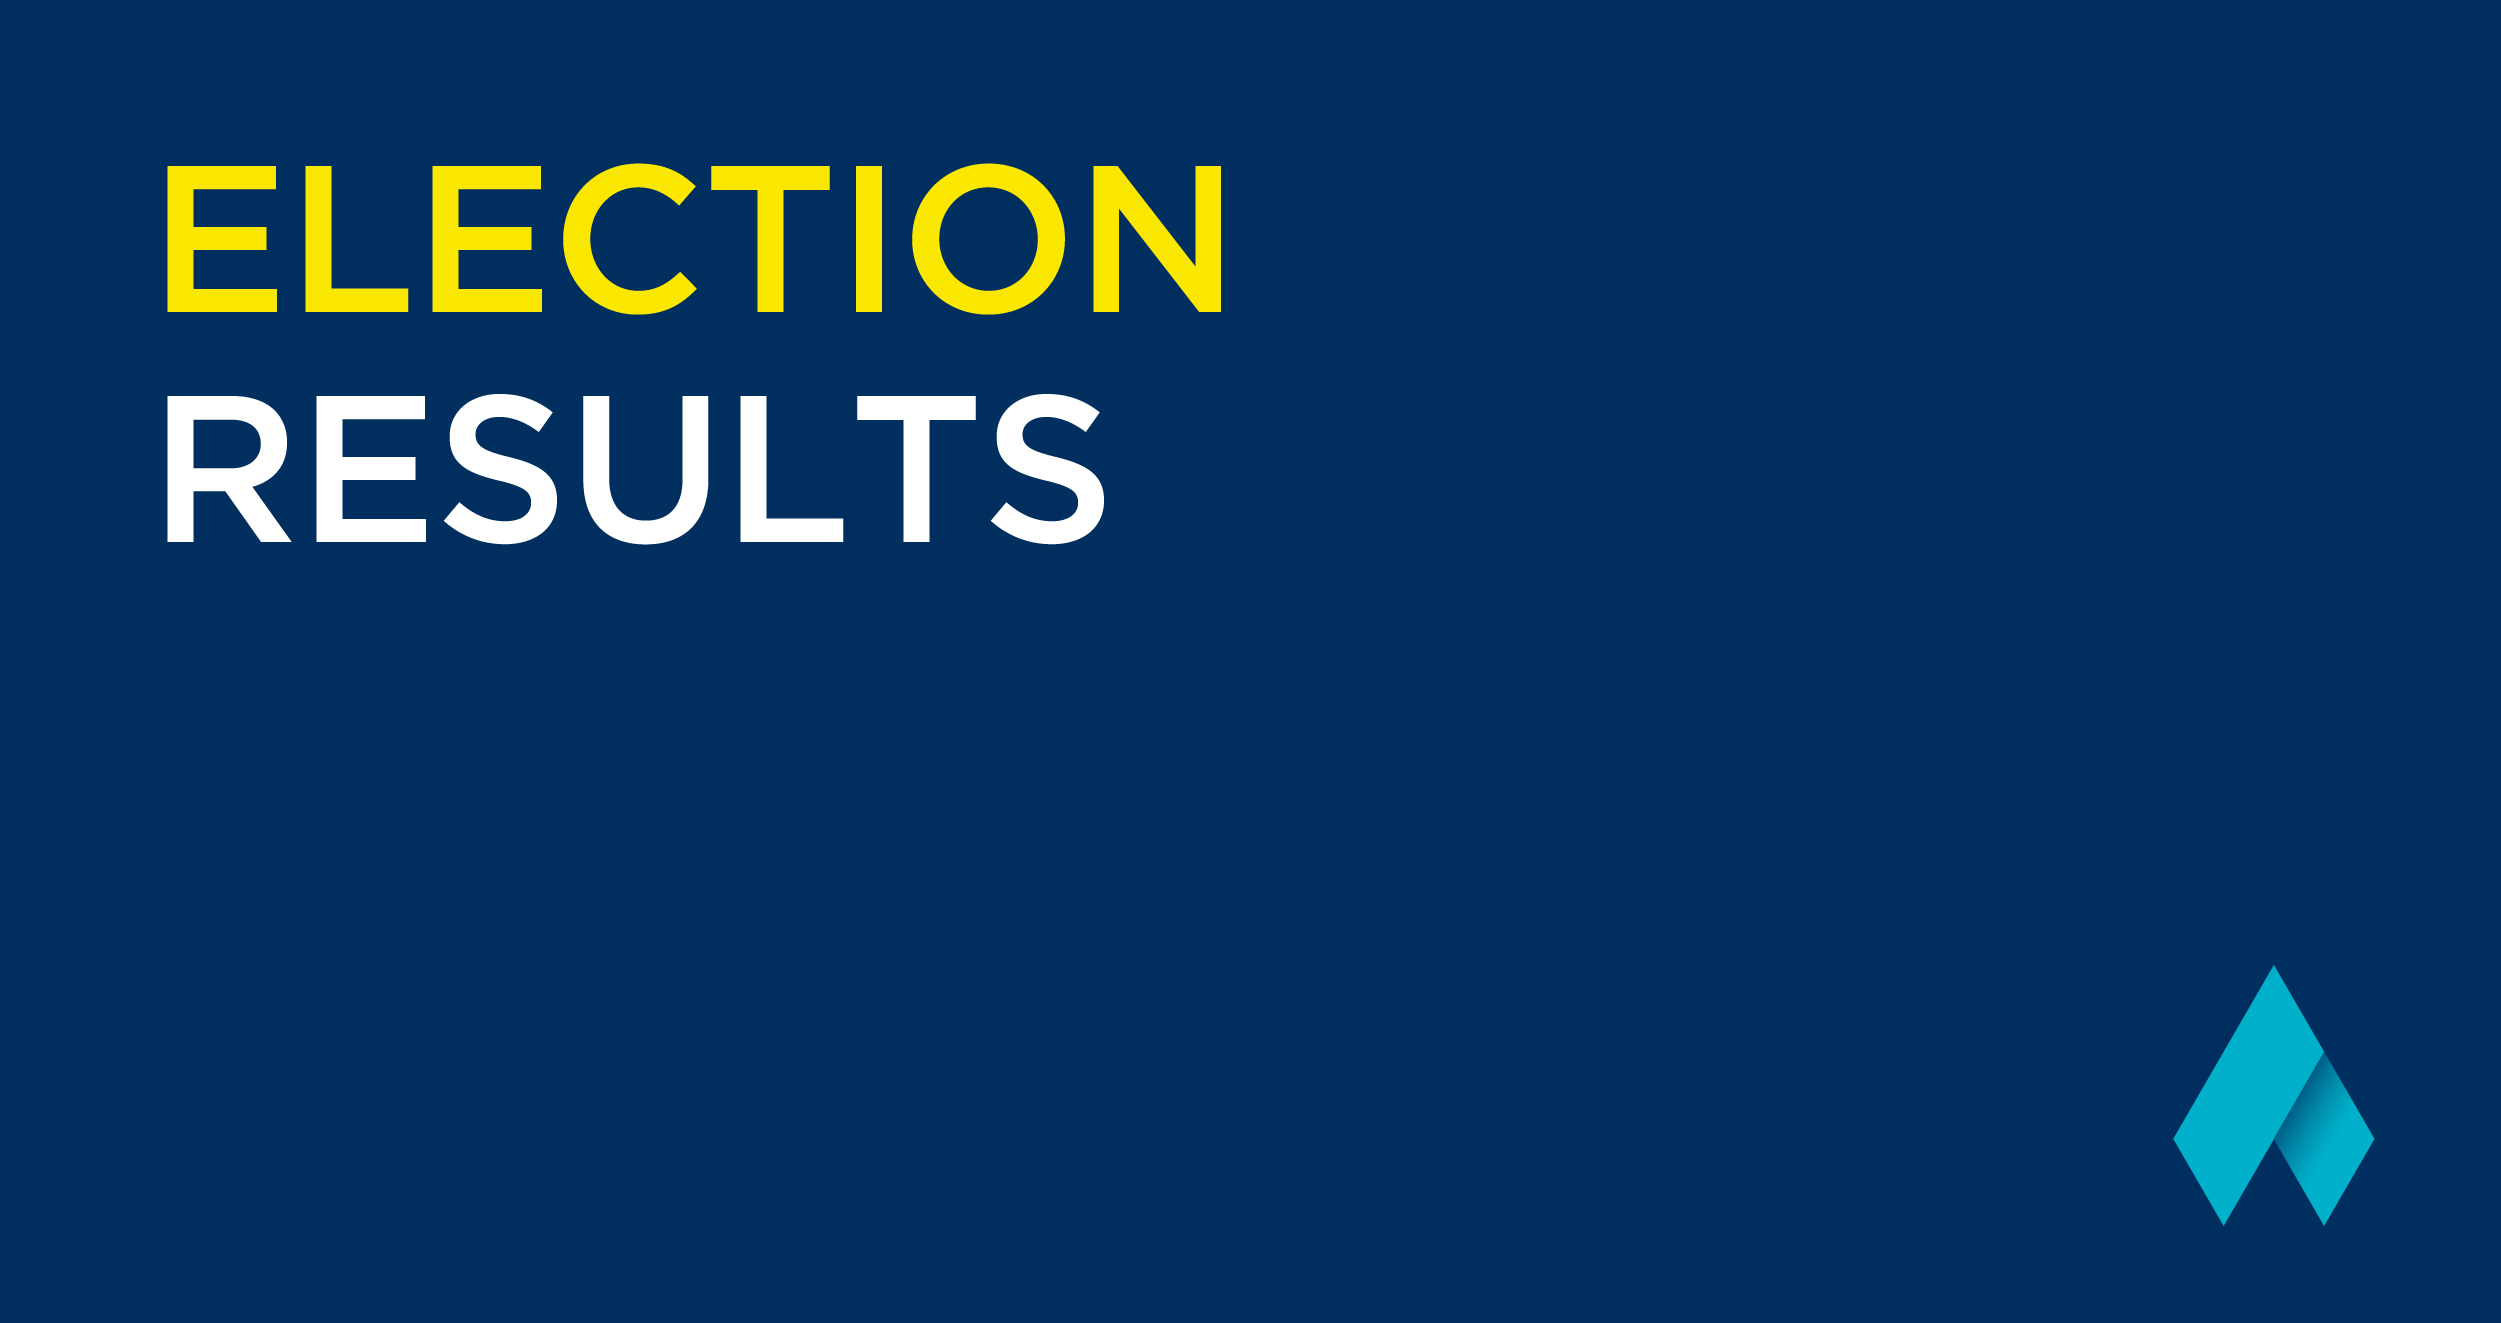 Election results announcement